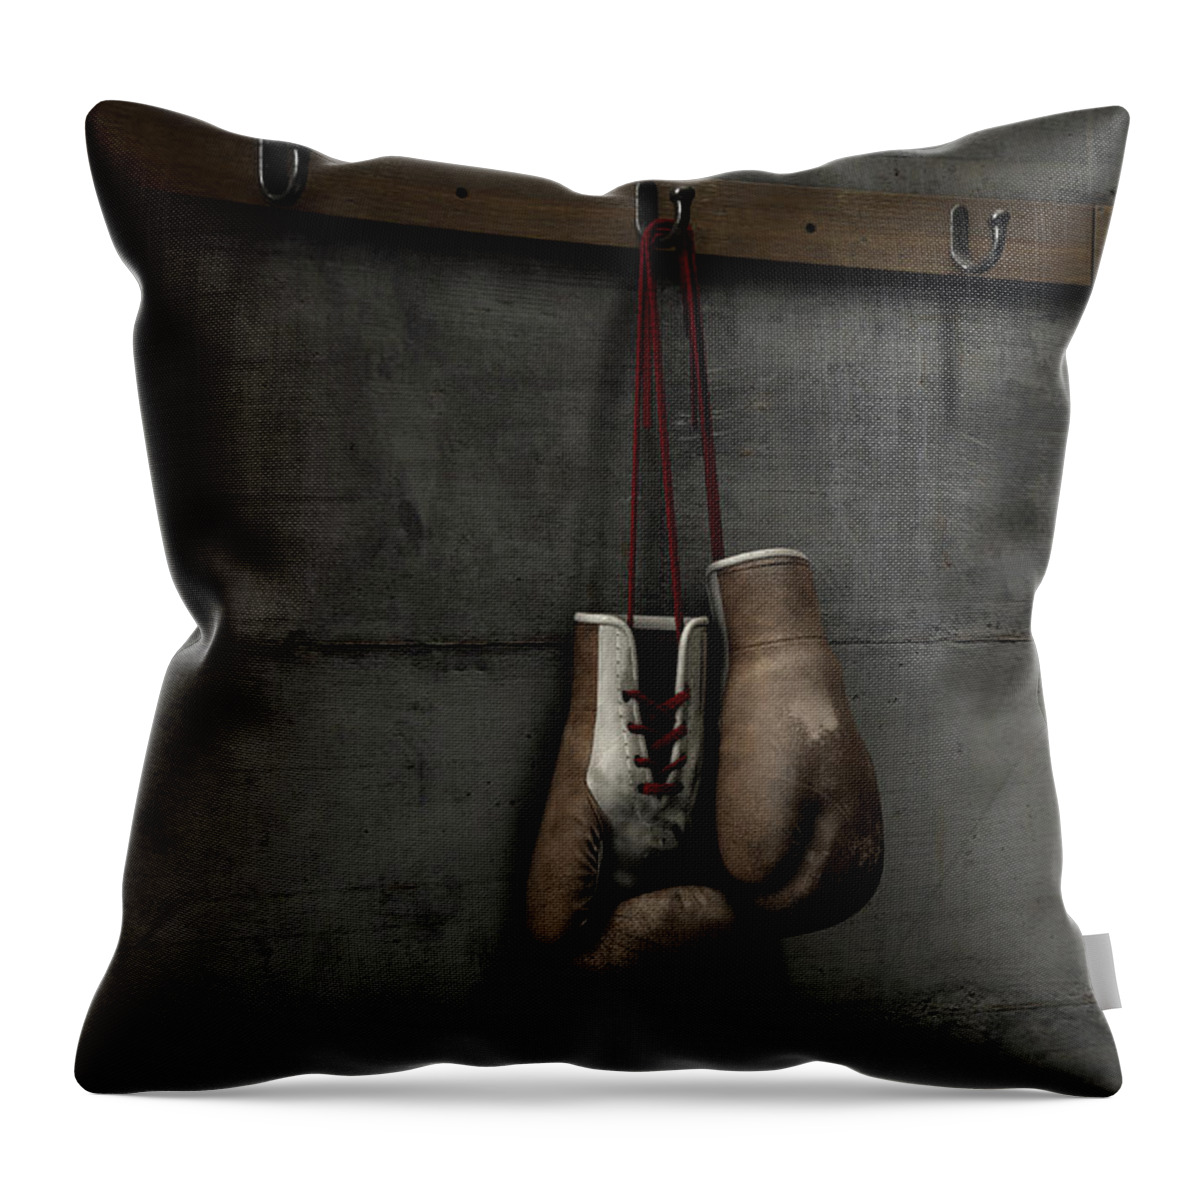 Worn Throw Pillow featuring the digital art Worn Vintage Boxing Gloves Hanging In Change Room #4 by Allan Swart